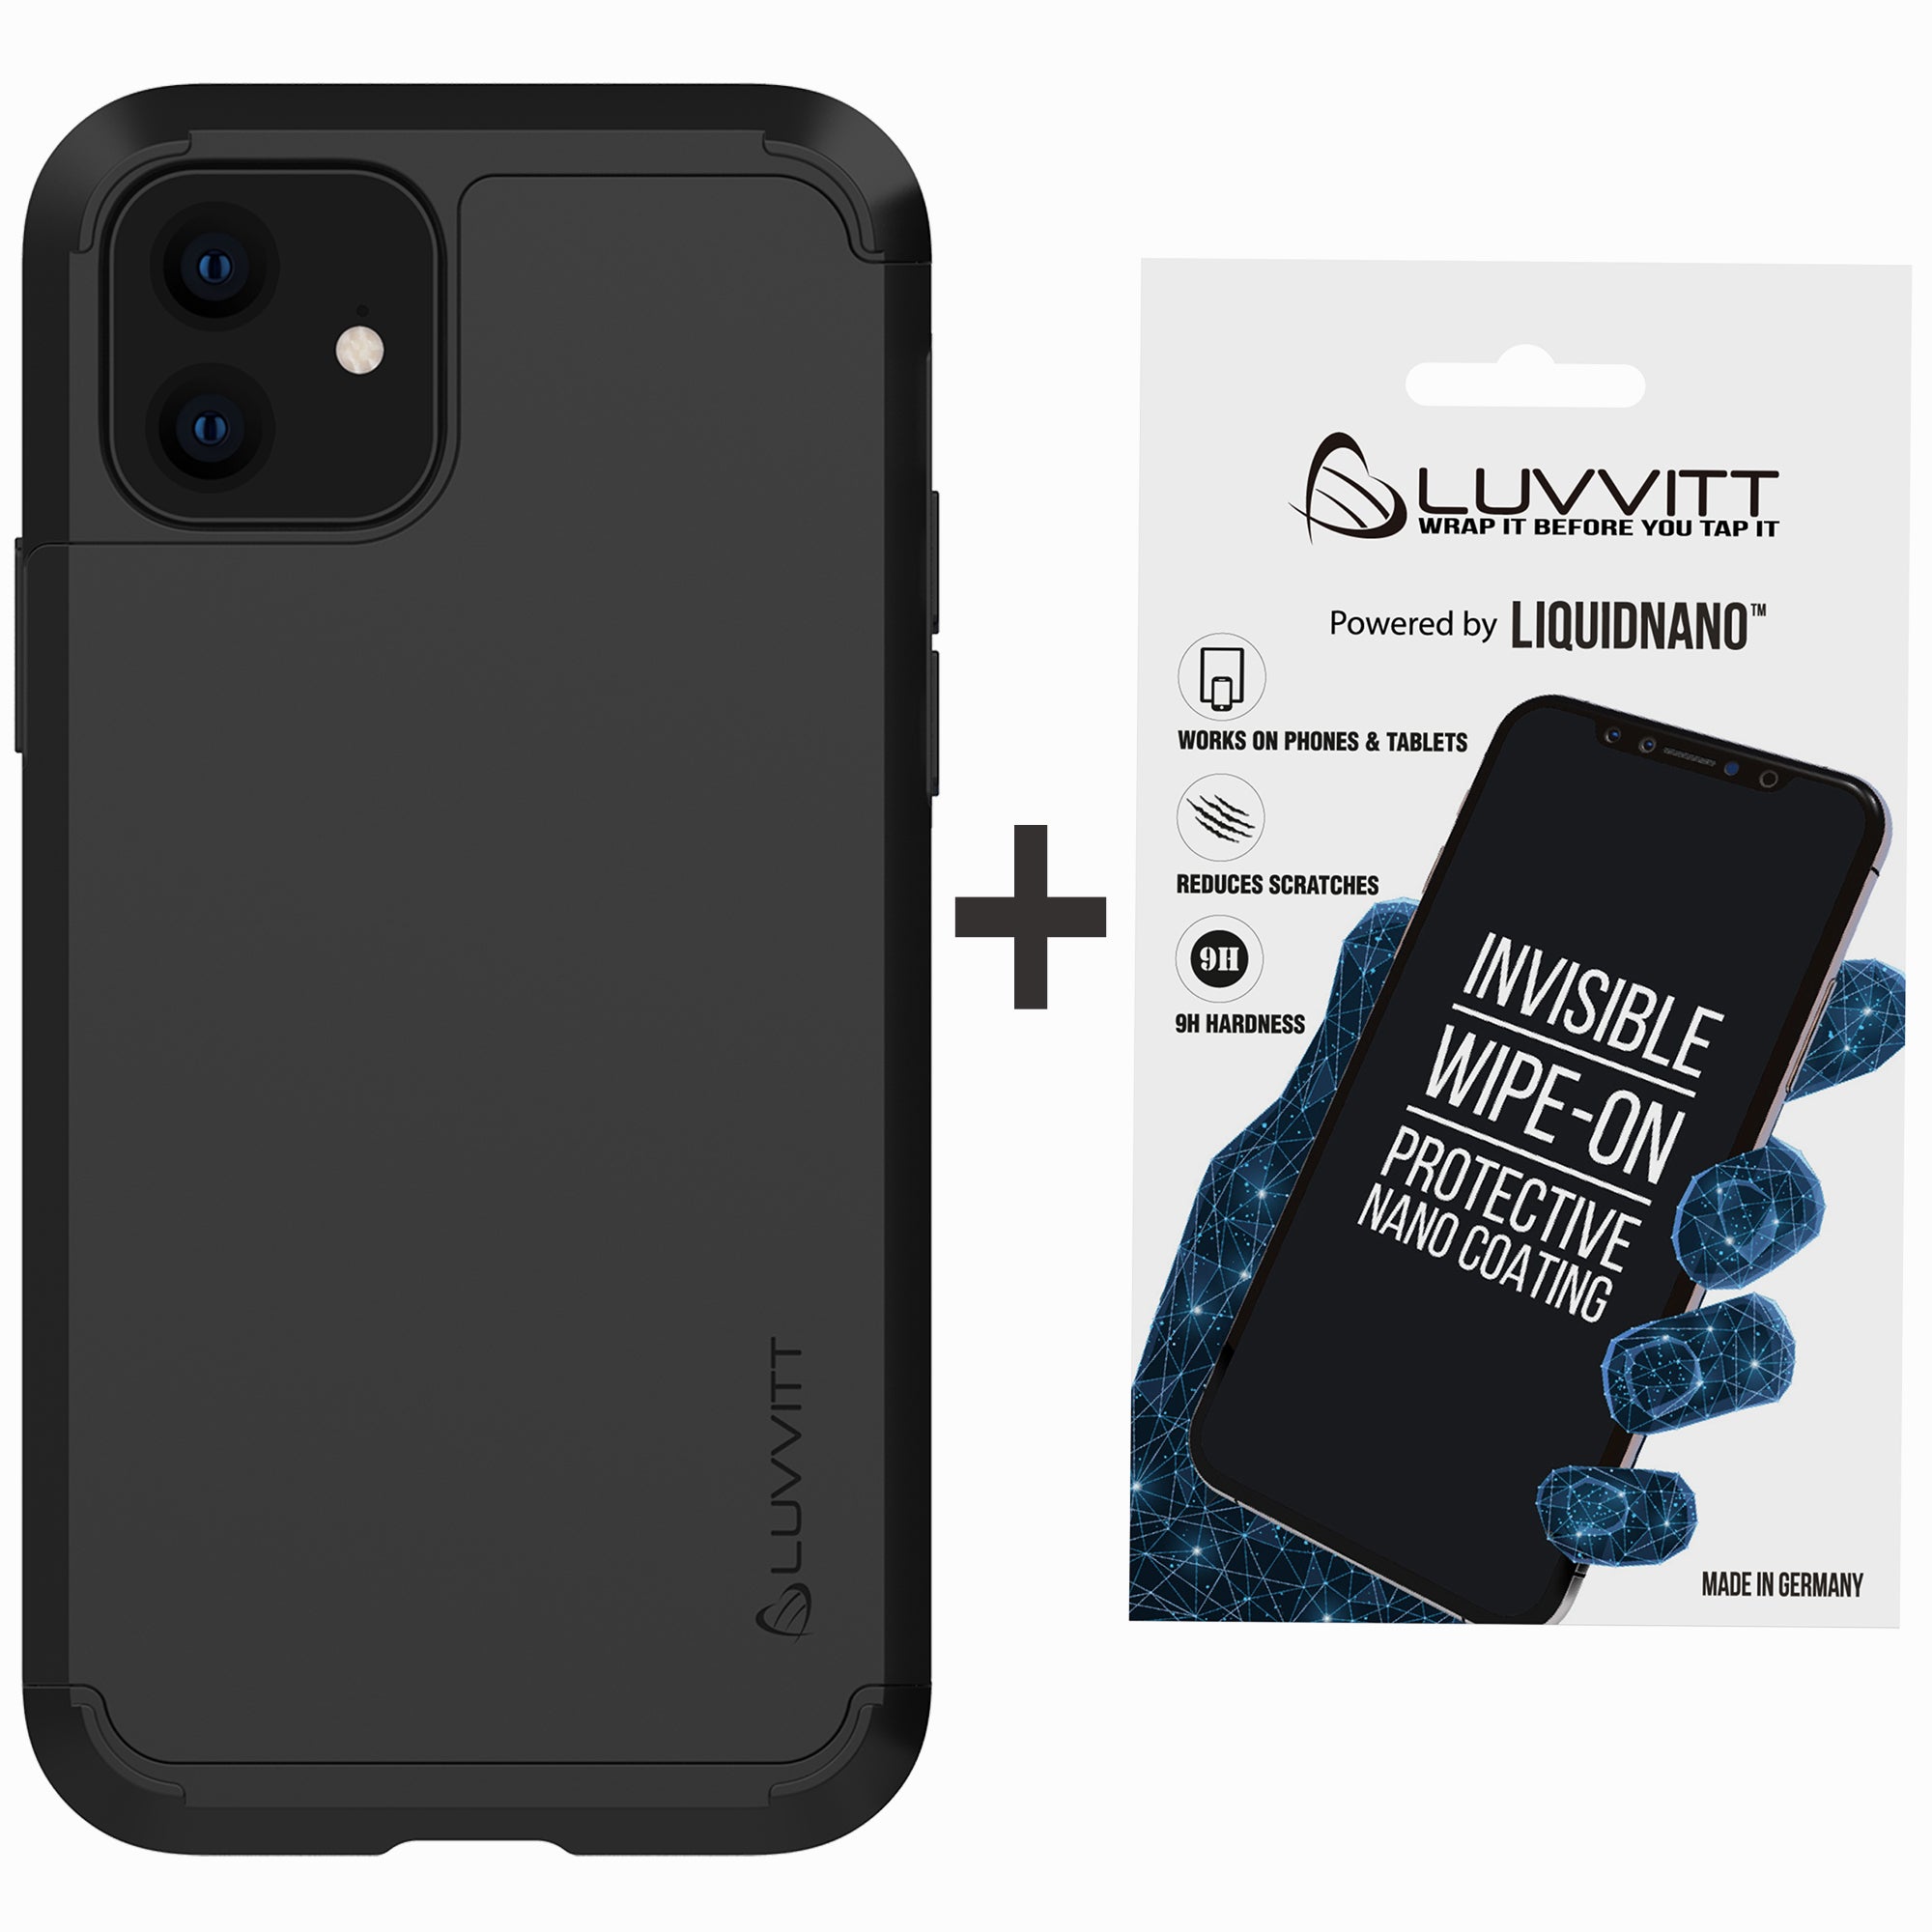 Luvvitt Ultra Armor Case and Liquid Glass Screen Protector Bundle for iPhone 11 2019 - Black